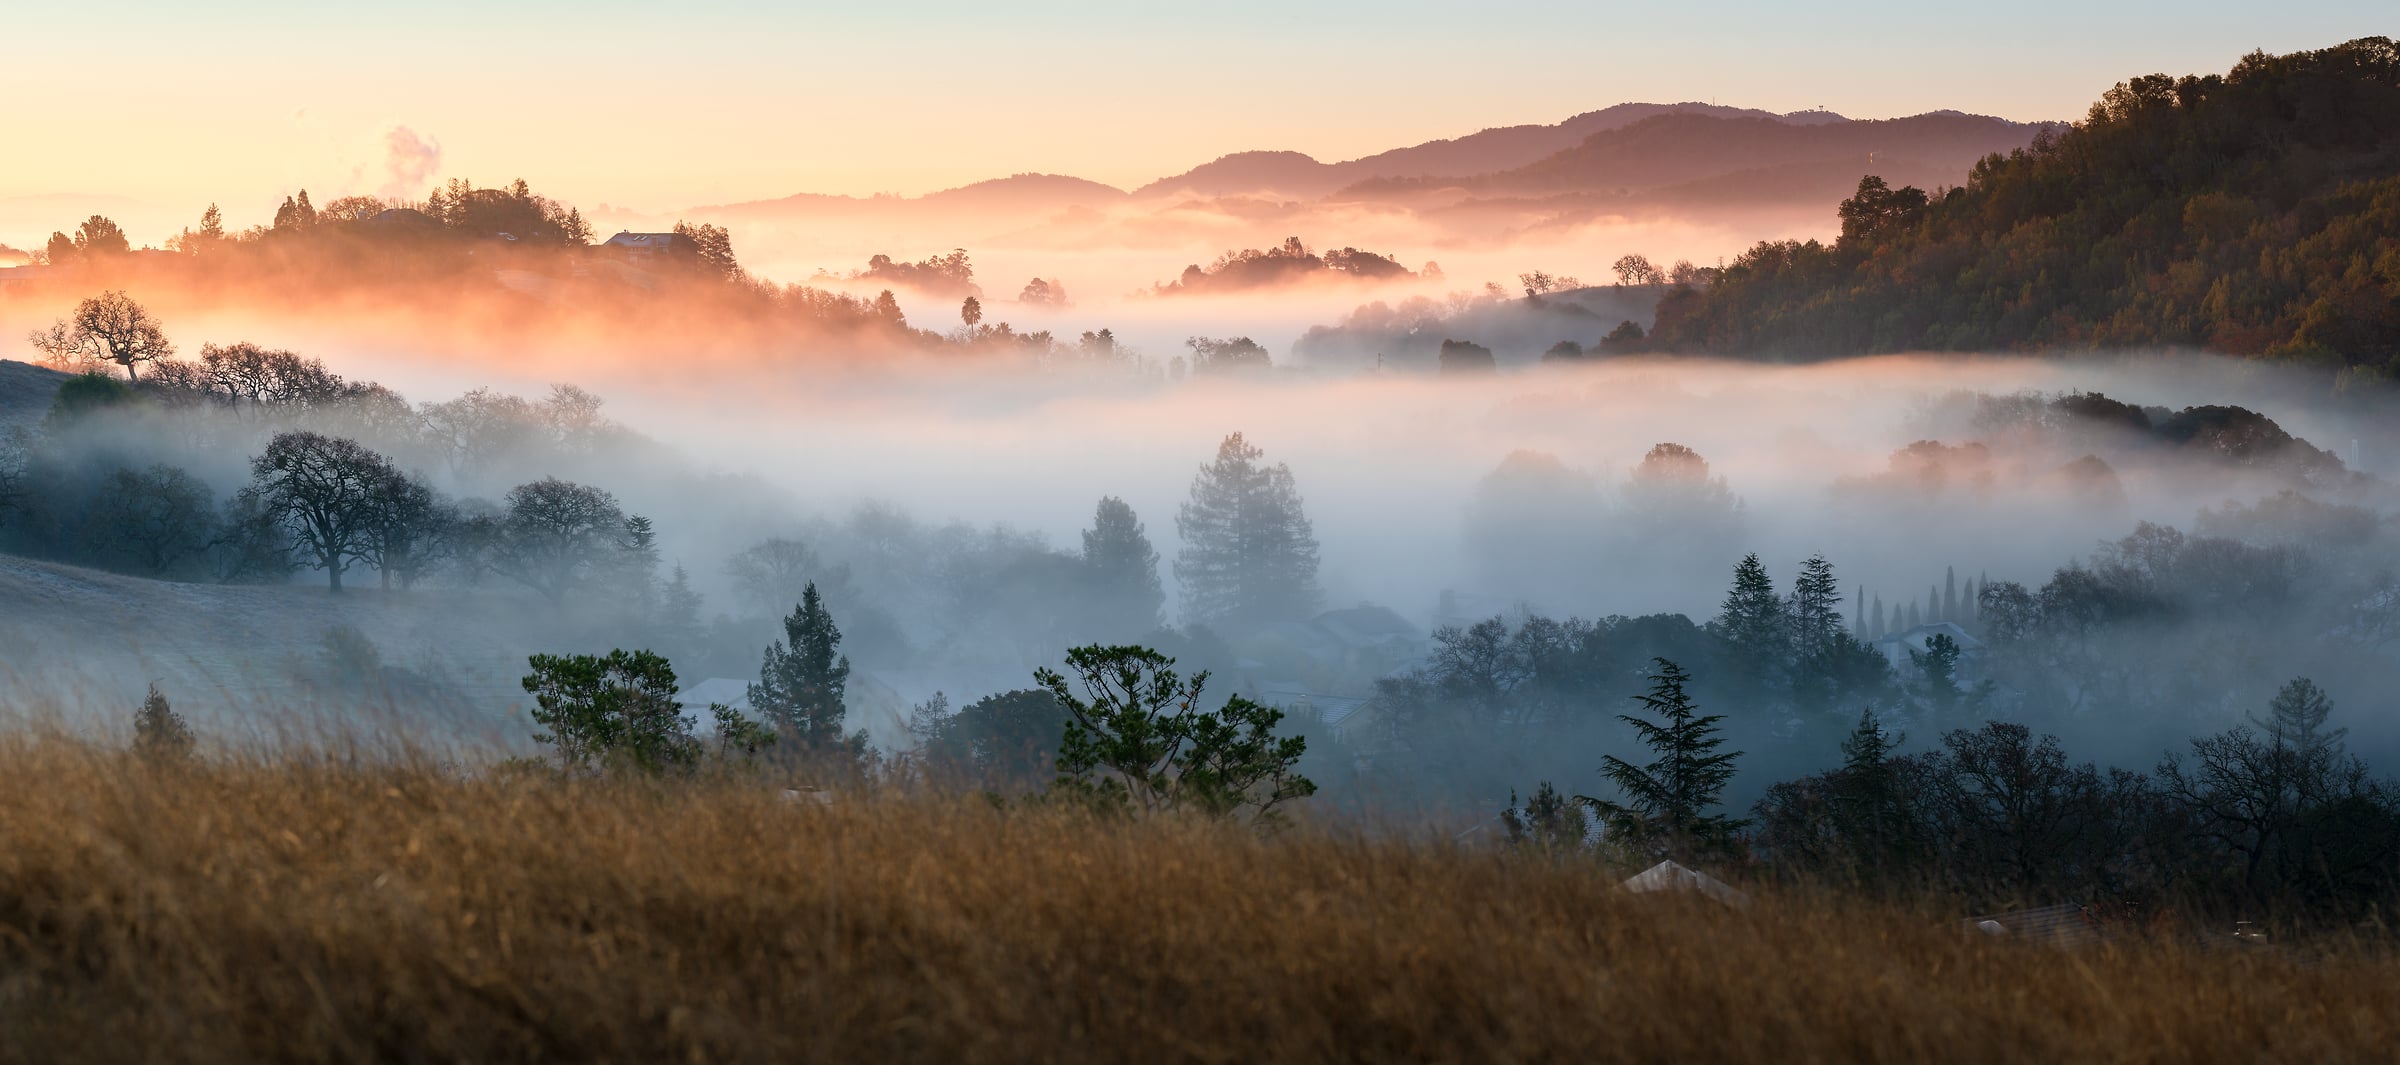 173 megapixels! A very high resolution, large-format VAST photo print of a beautiful sunrise with morning fog, mist, fields, trees, hills, and mountains in the distance; landscape photograph created by Jeff Lewis in Marin County, California.